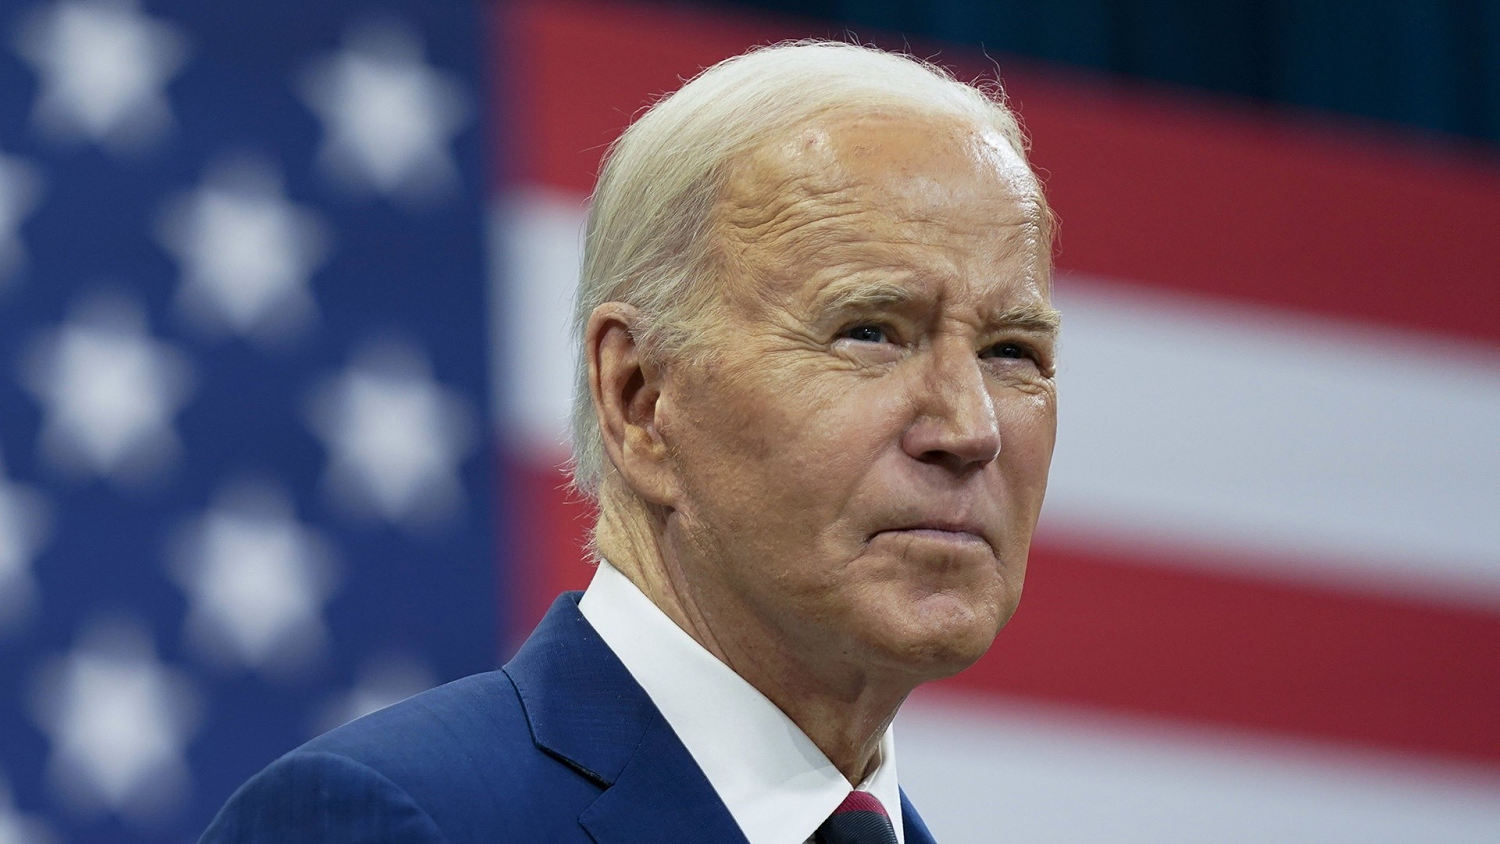 What’s the White House’s plan as more urge Biden to step aside?